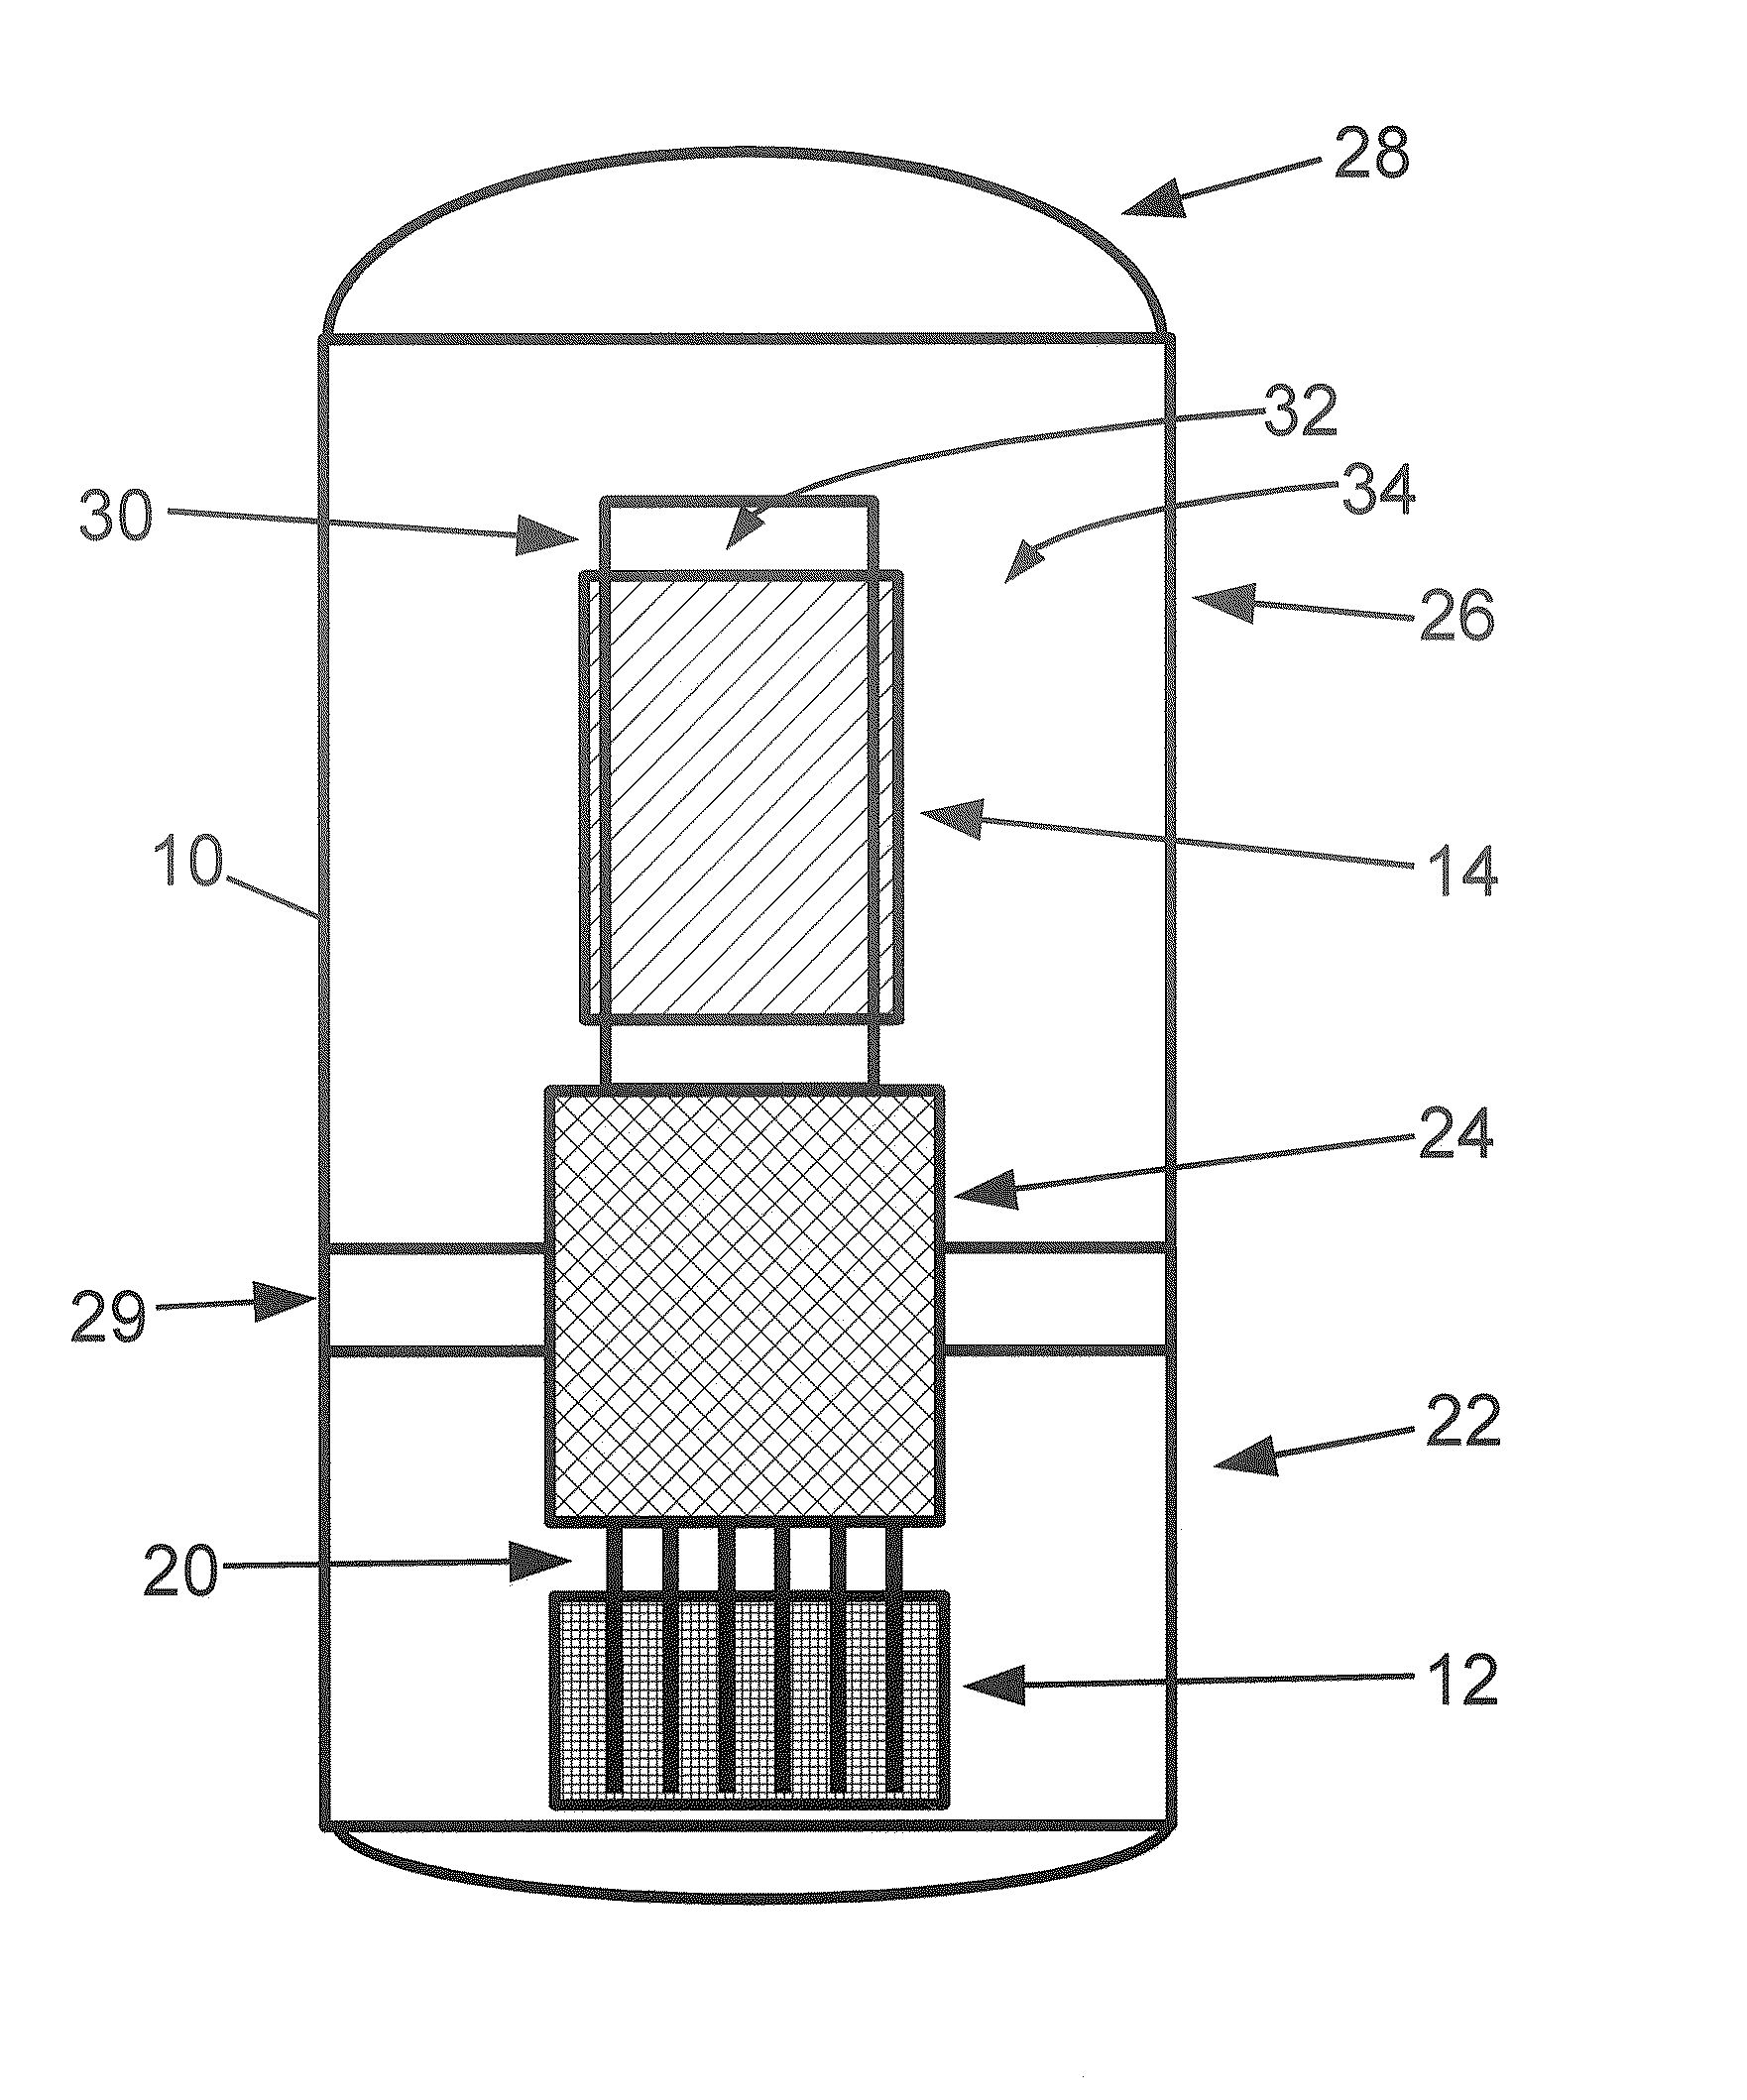 Control rod drive mechanism for nuclear reactor